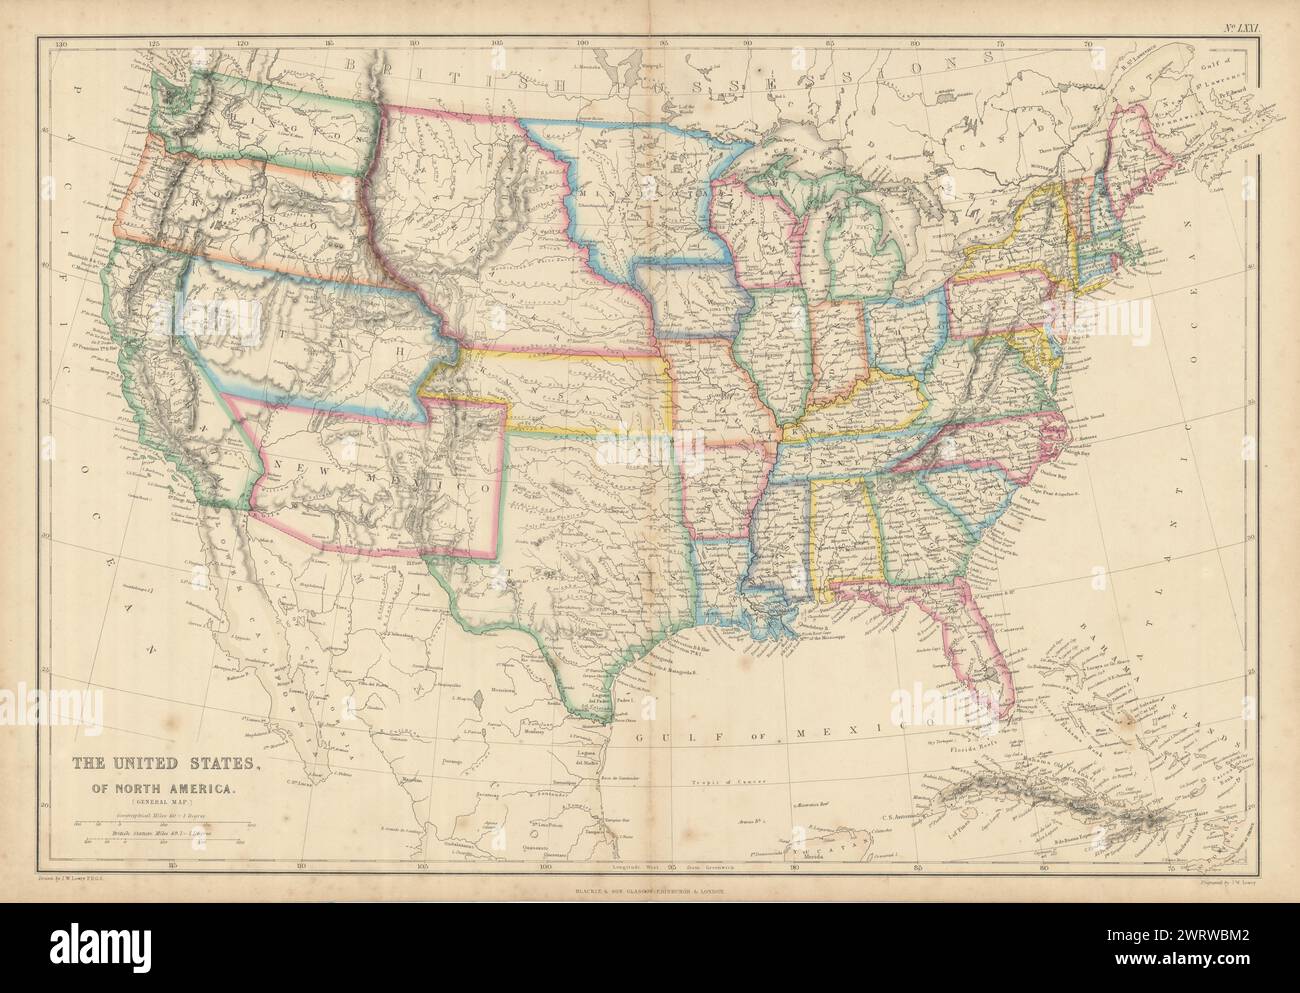 United States of North America. Early territorial boundaries. LOWRY 1860 map Stock Photo